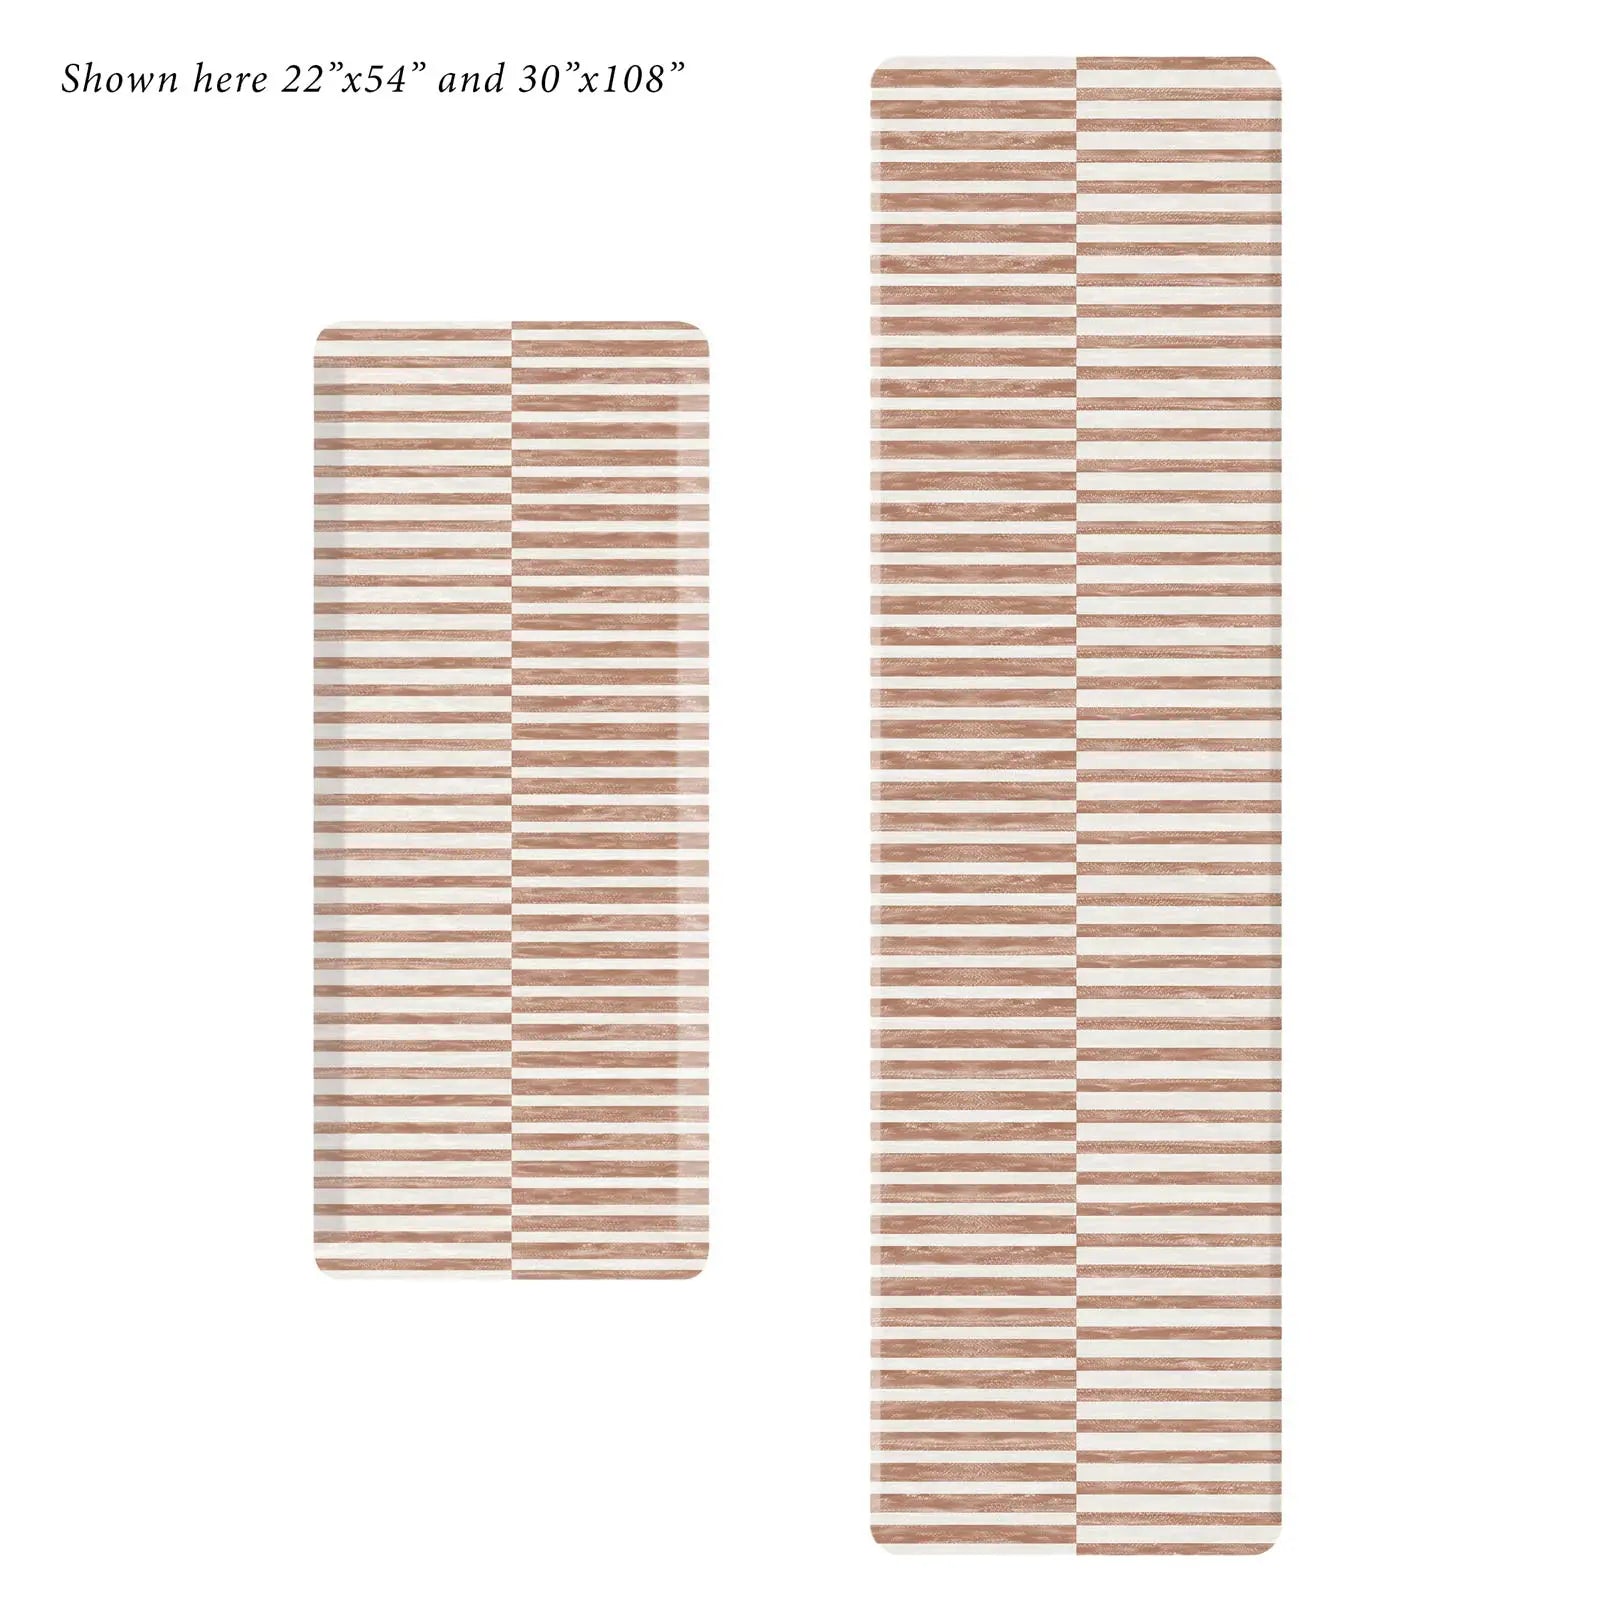 Reese terracotta brown and white striped standing mat shown in sizes 22x54 and 30x108